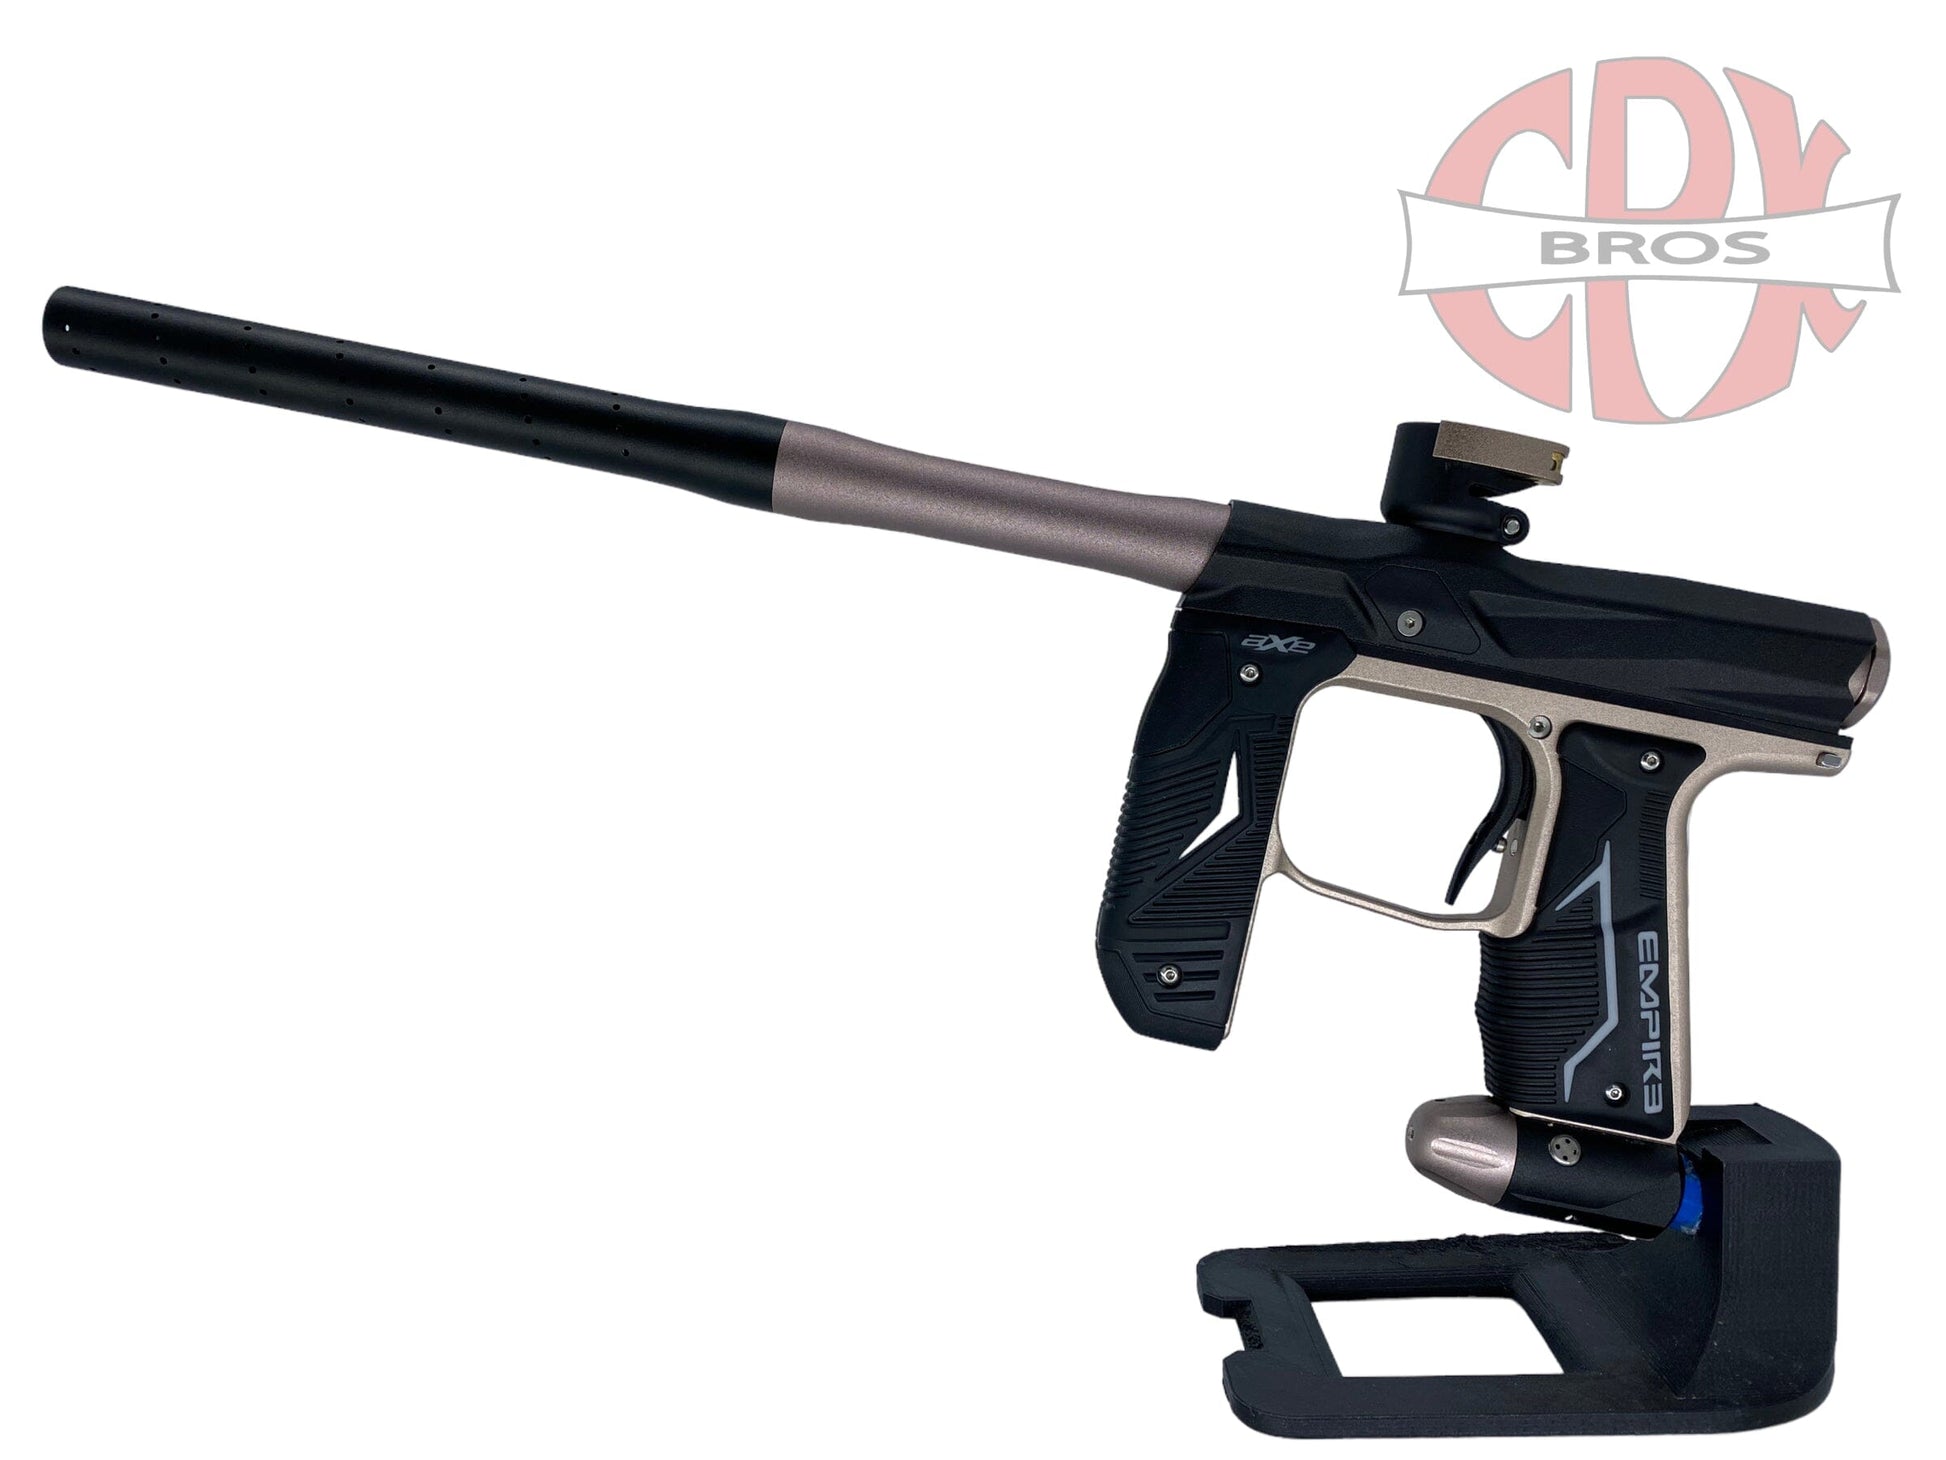 Used Empire Axe 2.0 Oled Paintball Gun from CPXBrosPaintball Buy/Sell/Trade Paintball Markers, Paintball Hoppers, Paintball Masks, and Hormesis Headbands